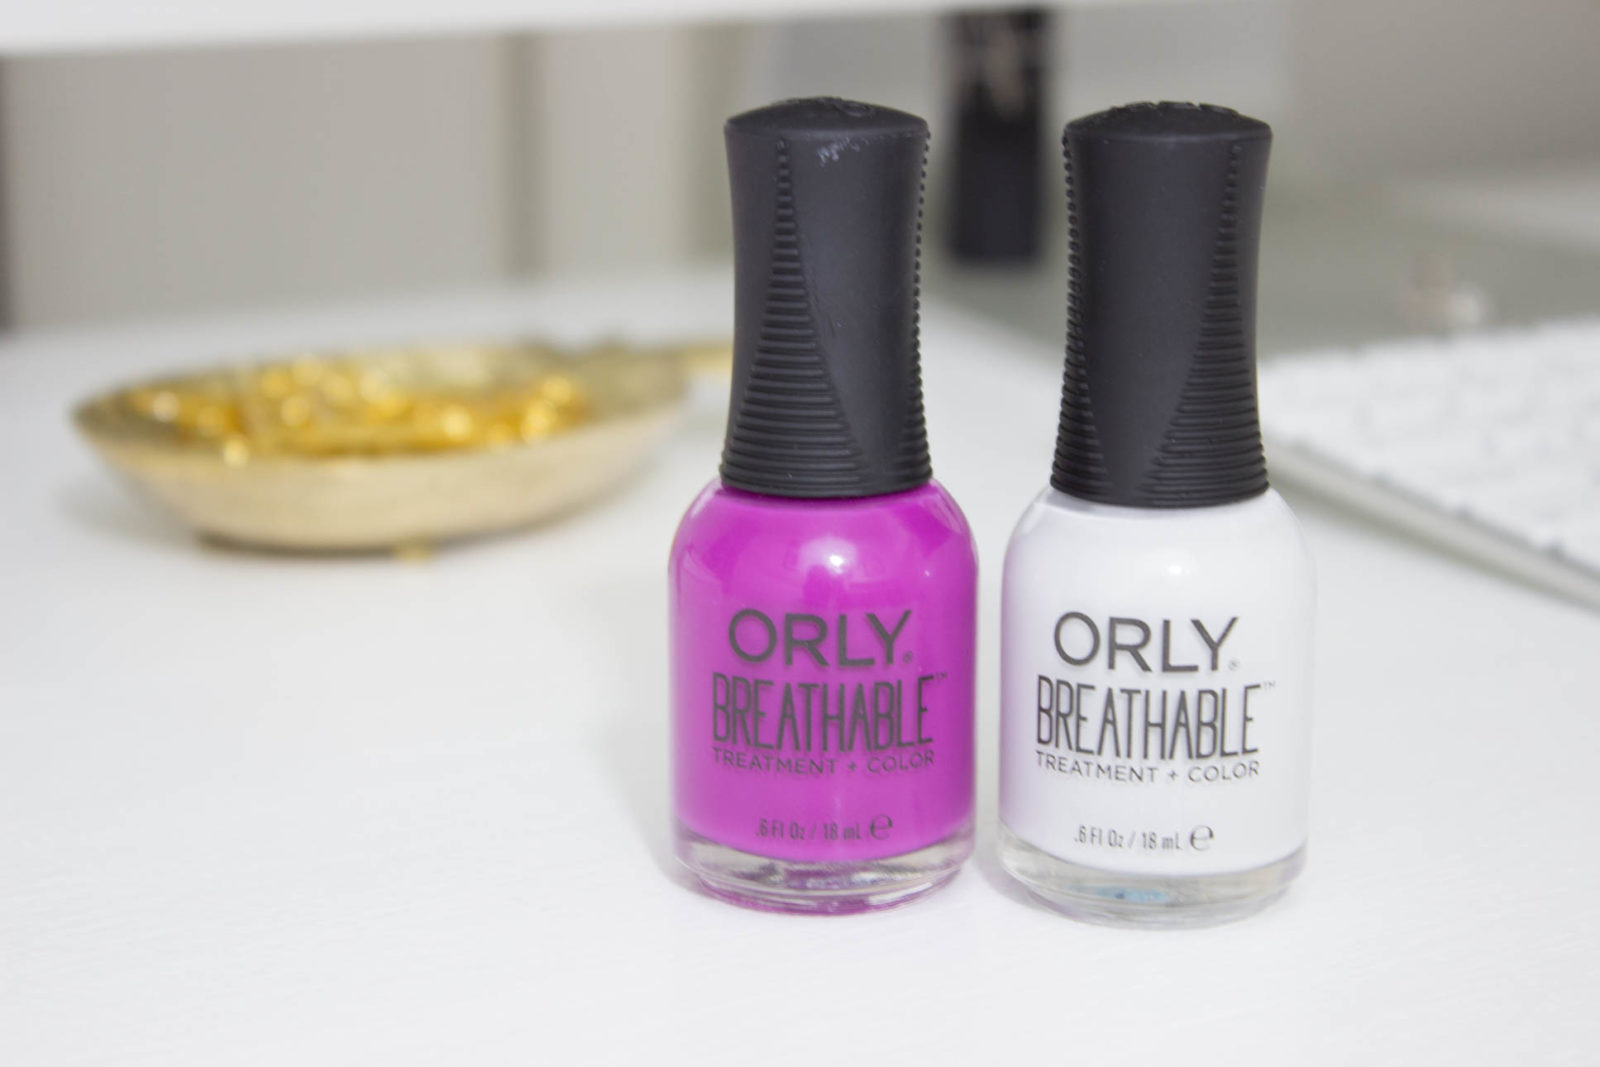 10. Orly Breathable Treatment + Color in "Pilates Hottie" - wide 3